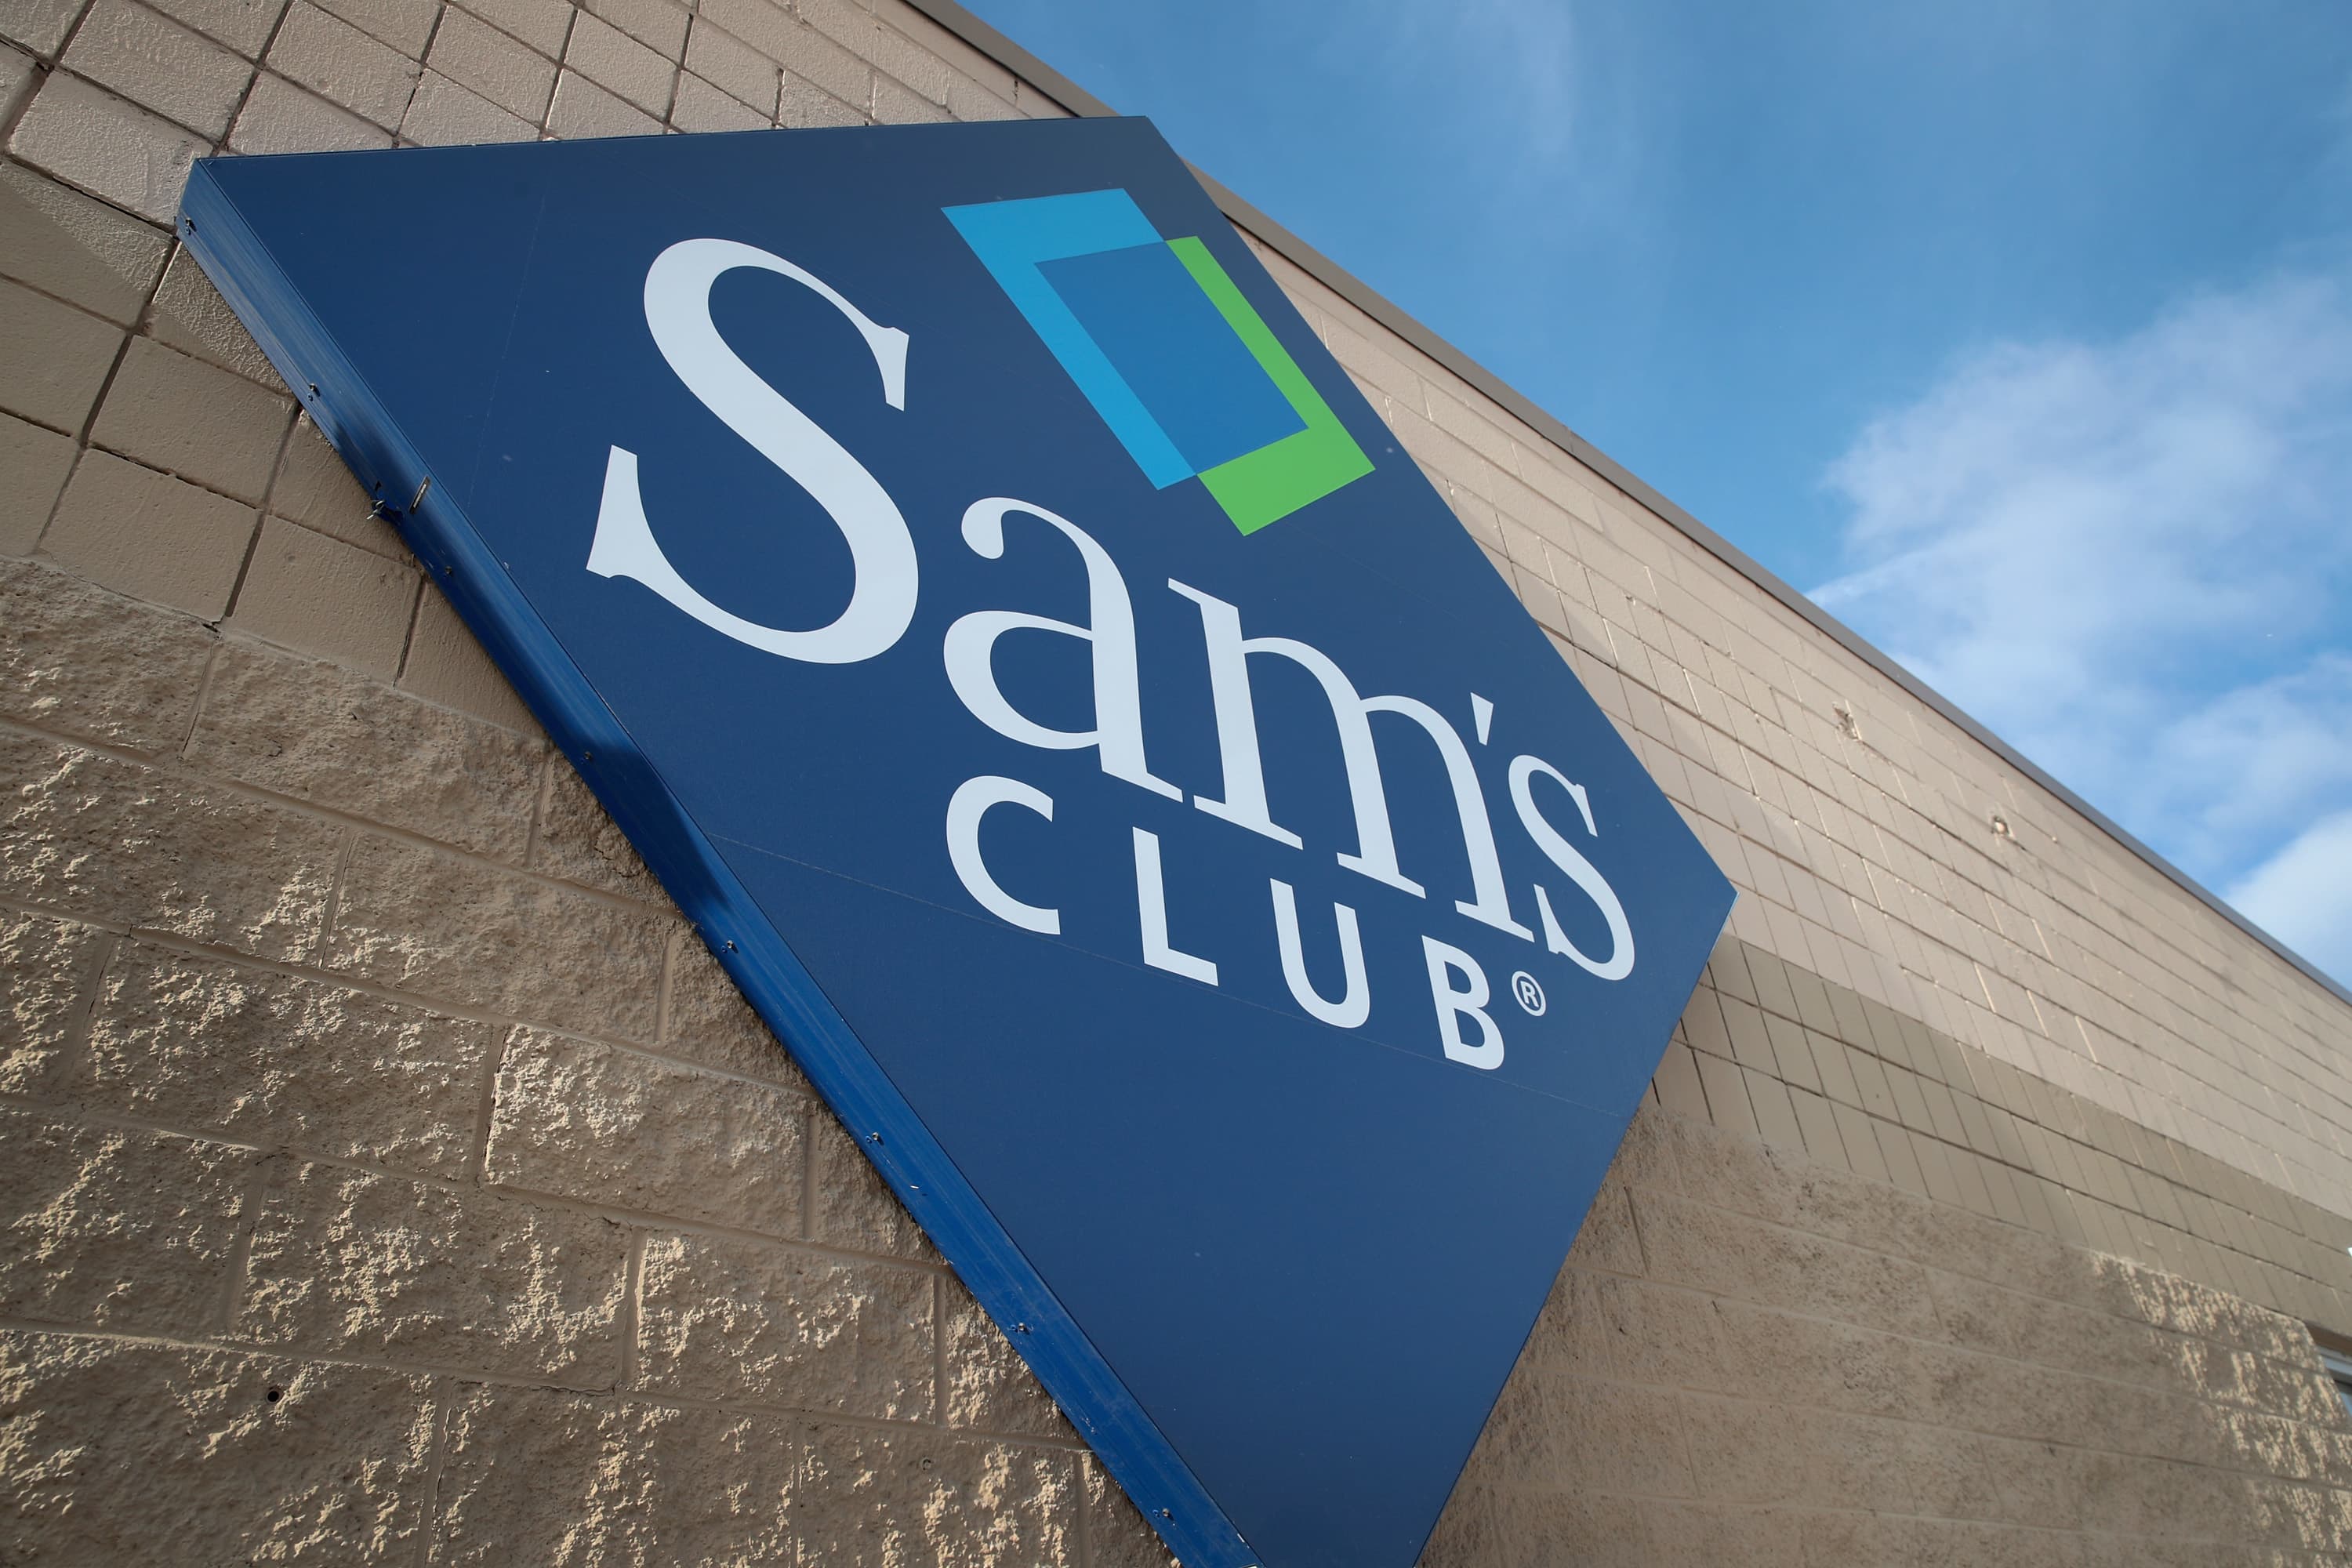 Walmart-owned Sam's Club raises annual membership fee for first time in 9  years